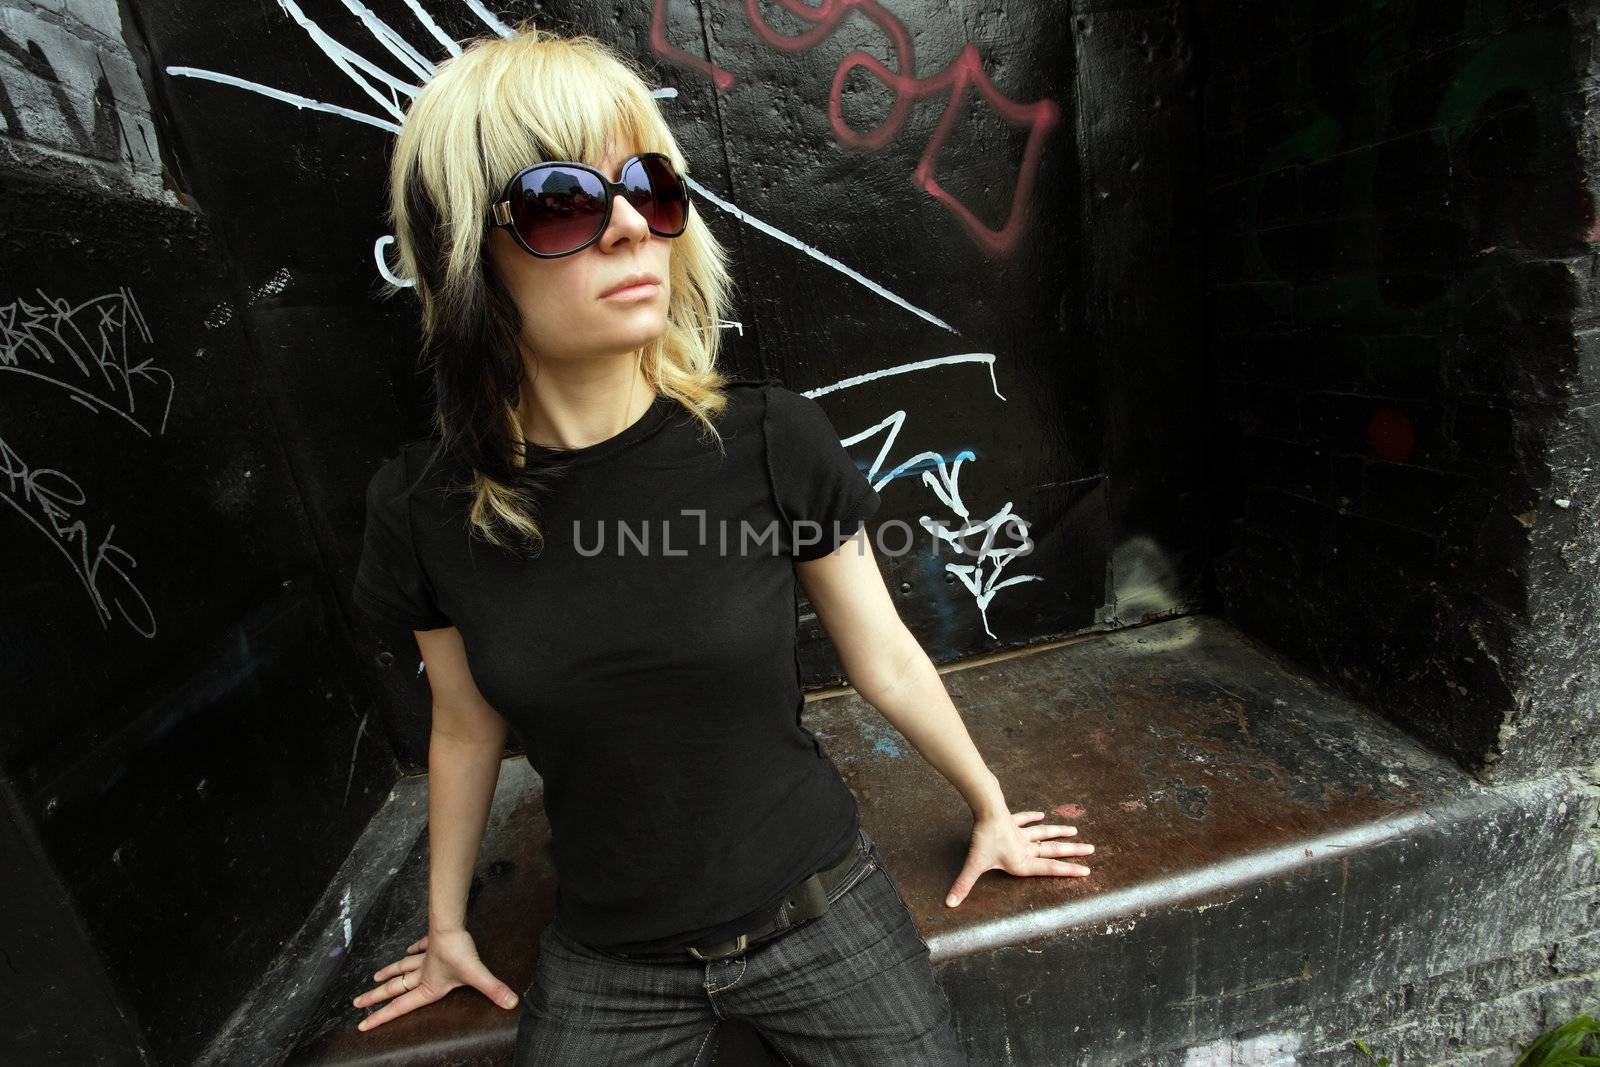 Beautiful young woman posing in the city wearing large sunglasses.
